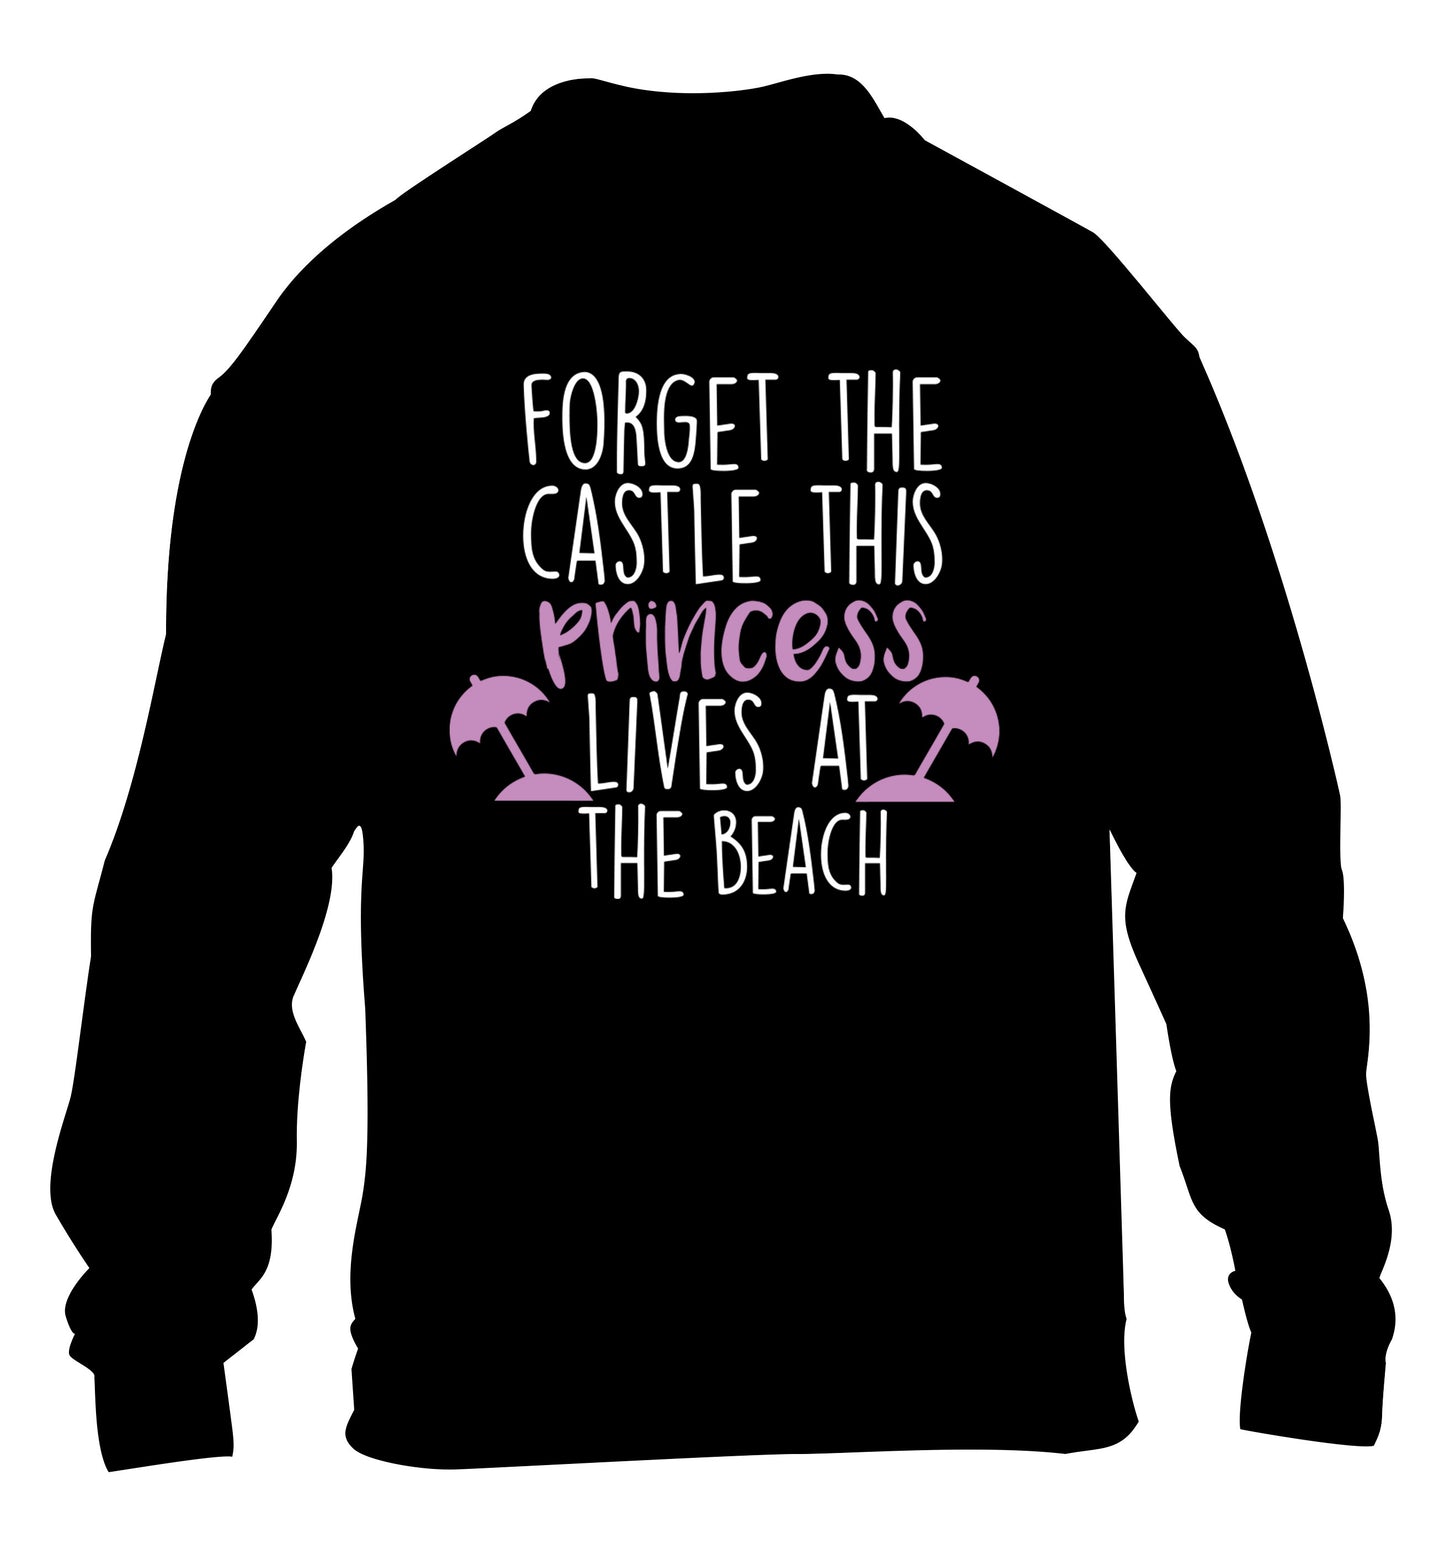 Forget the castle this princess lives at the beach children's black sweater 12-14 Years